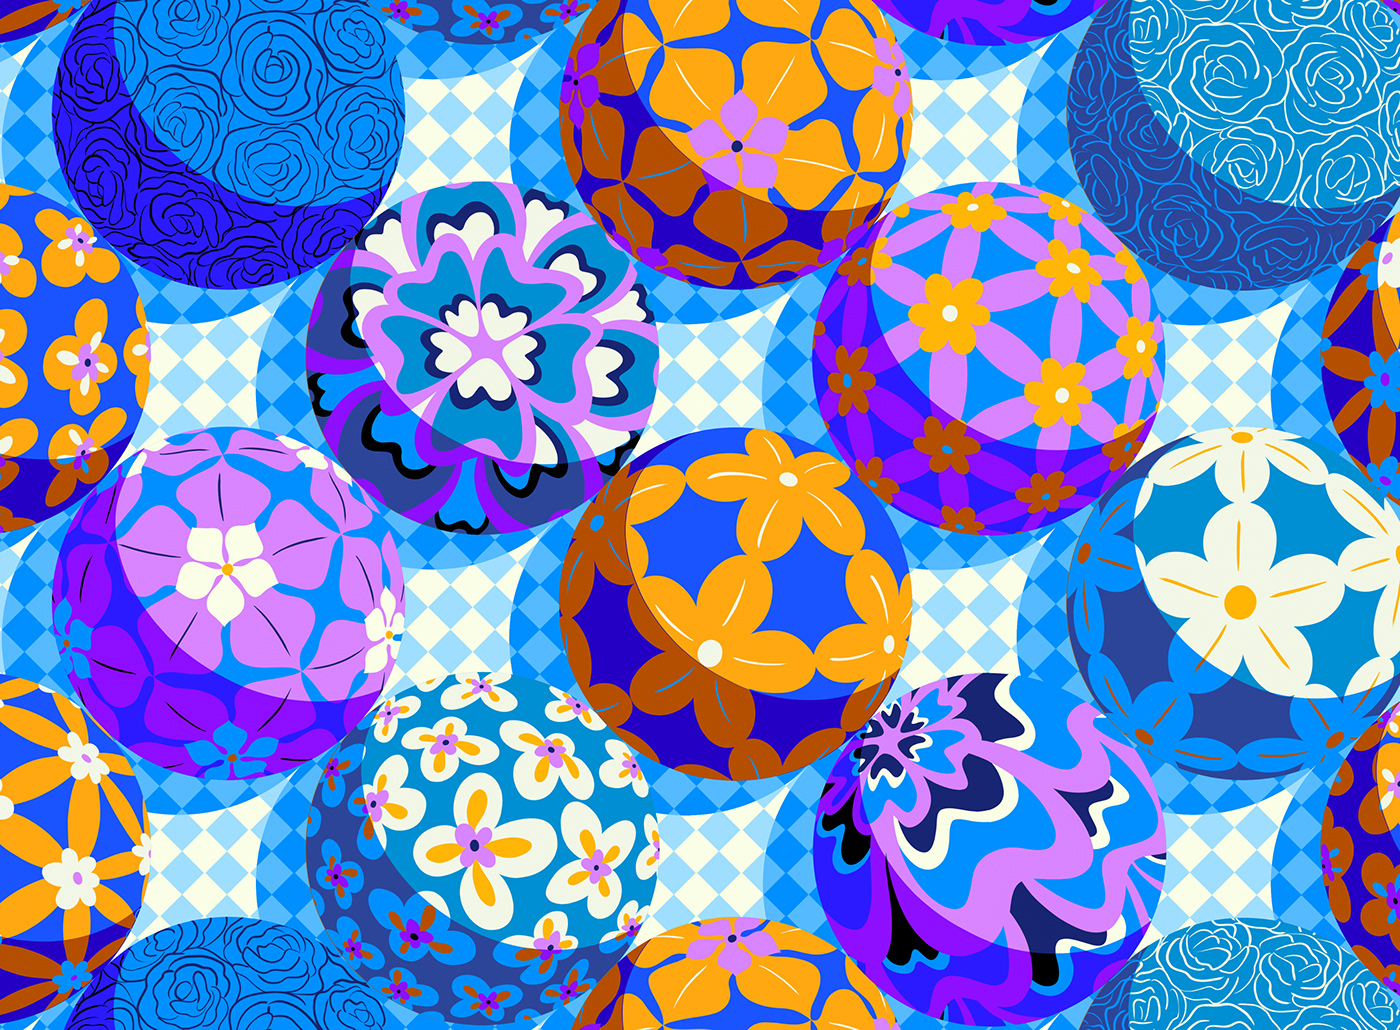 Spherical flower balls in orange, blue and purple colours with a Japanese quilt influence.